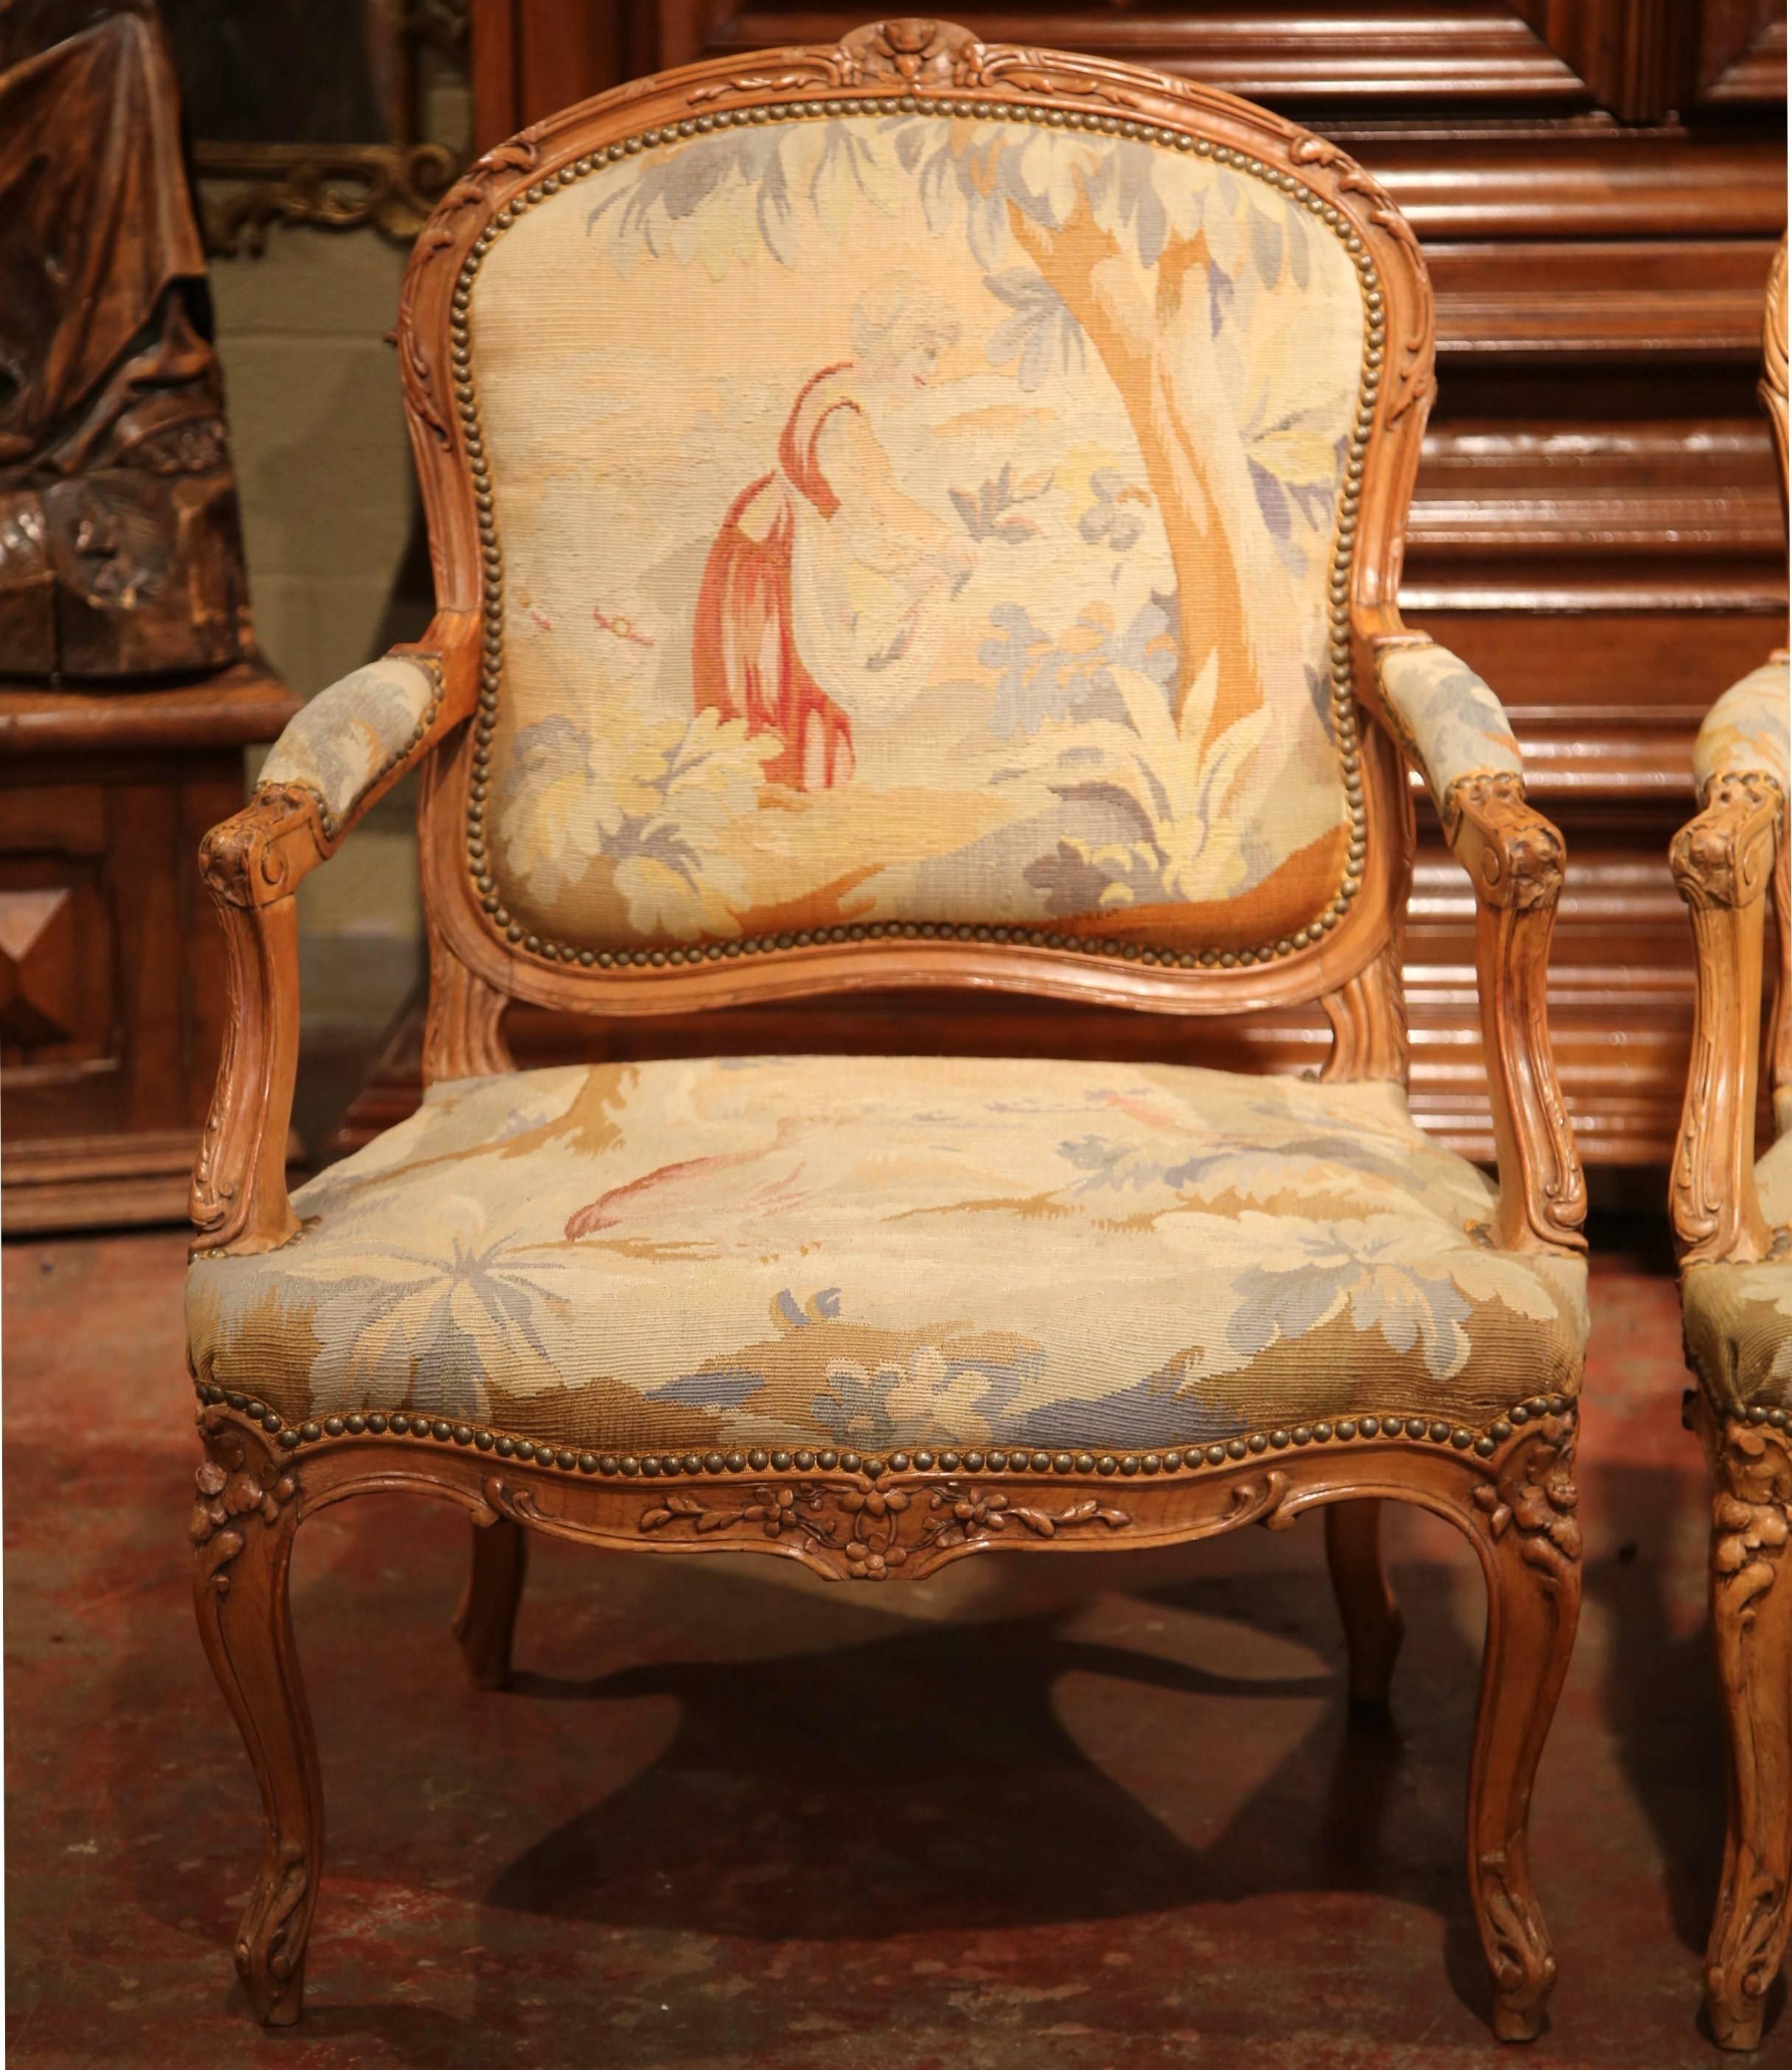 This elegant pair of antique fruitwood armchairs was crafted in Lyon, France circa 1860. Both armchairs are hand-carved and have beautiful cabriole legs and rounded backs. The chairs are both upholstered with original Aubusson tapestry. The scenes